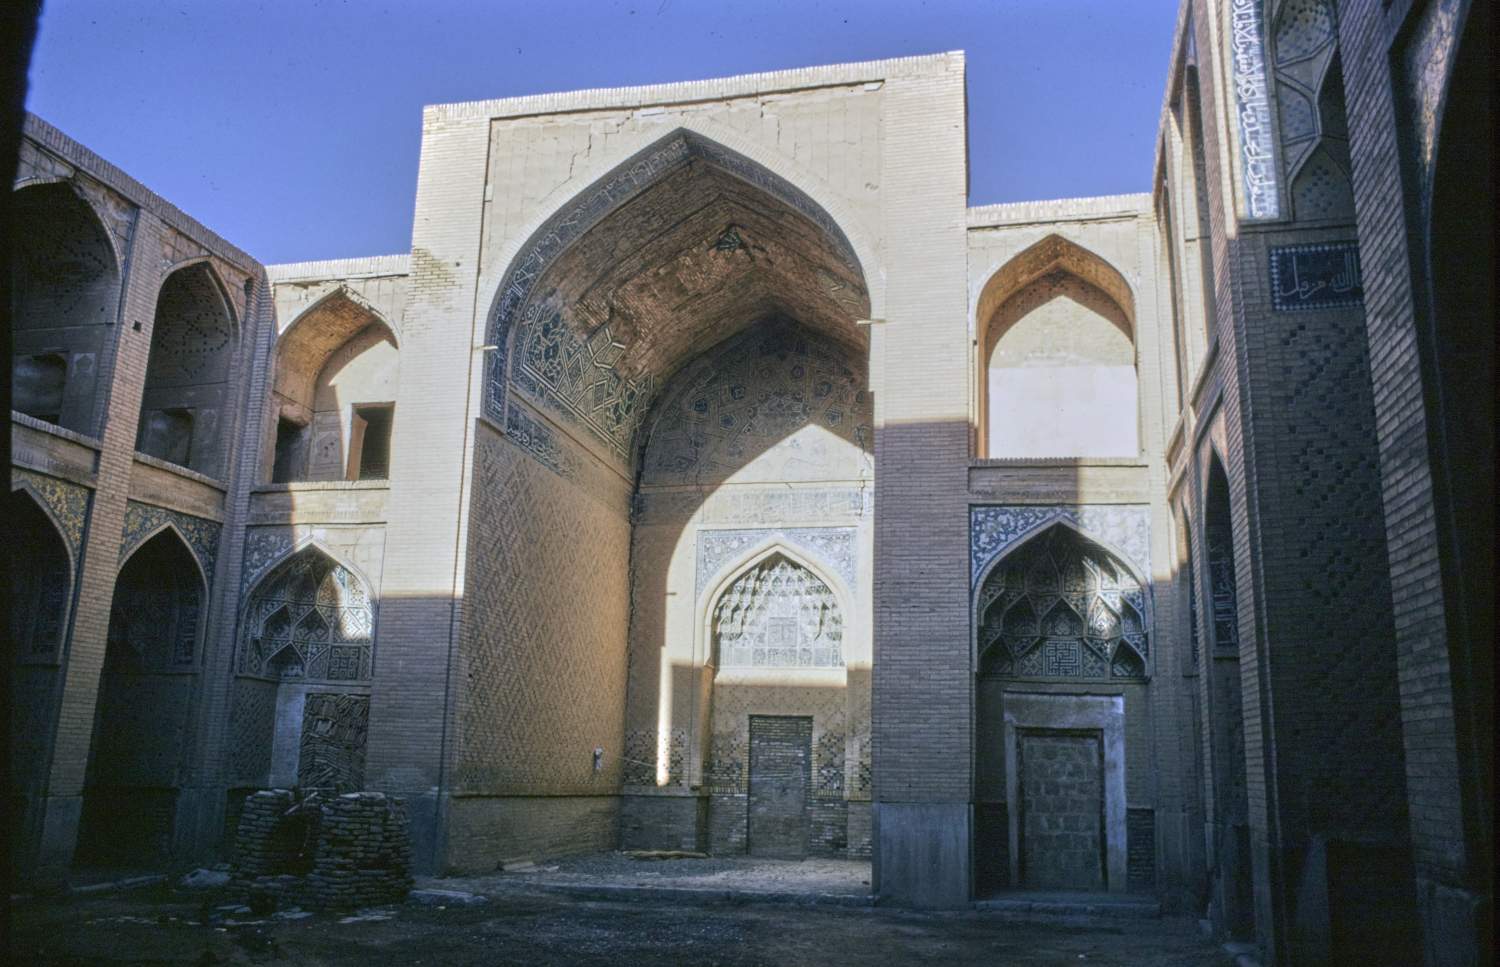 View of northern iwan from southeastern corner of courtyard.